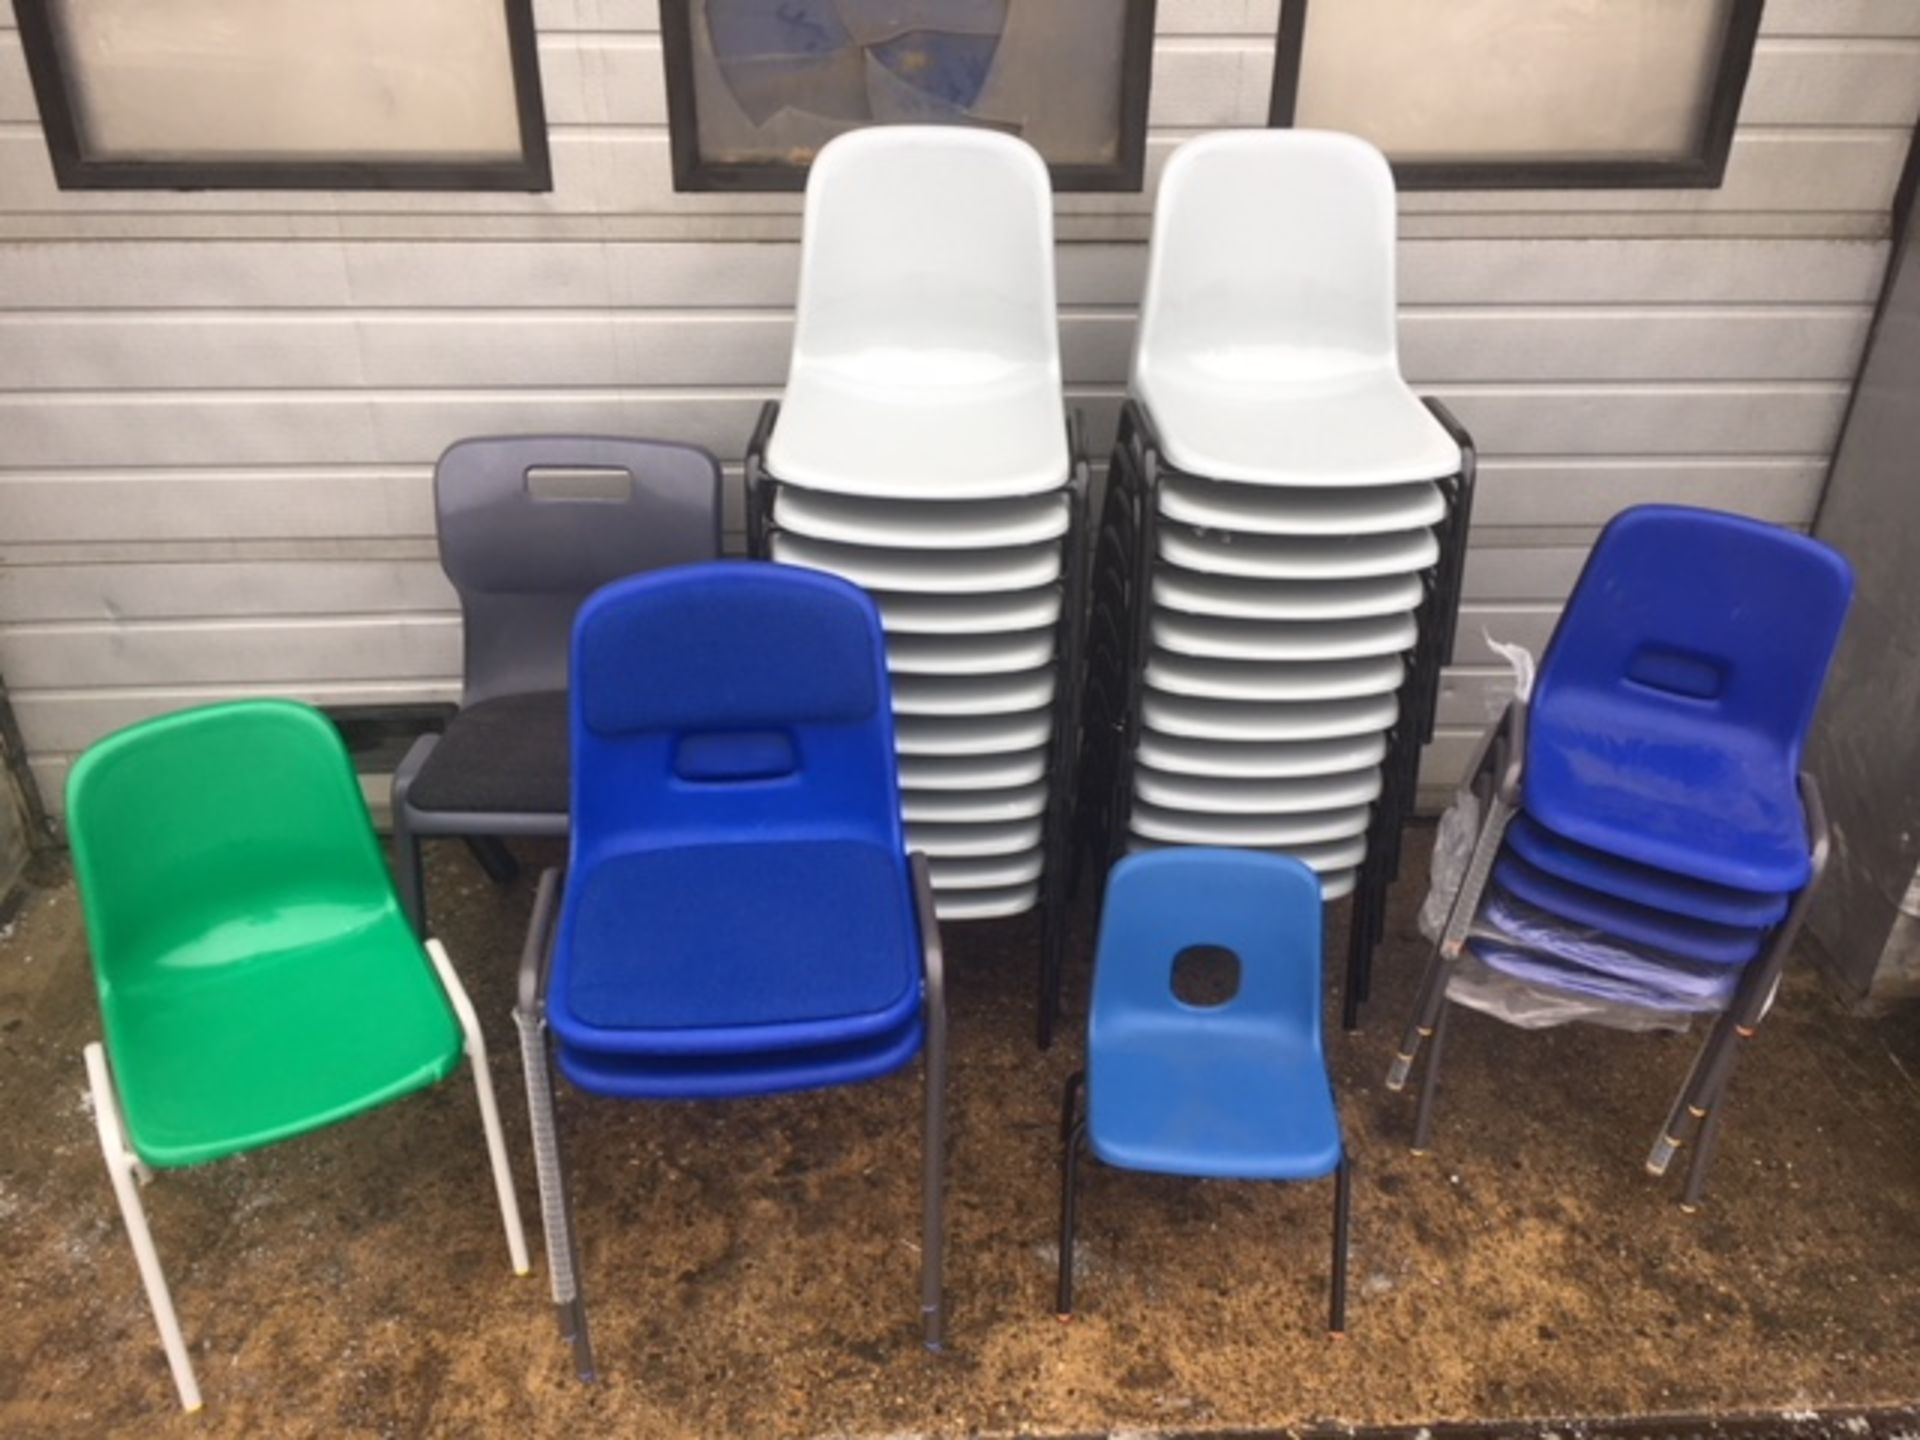 V Grade A Manufacturer Samples - Mostly Brand New Approx 32 Office & School/Nursery Chairs Inc